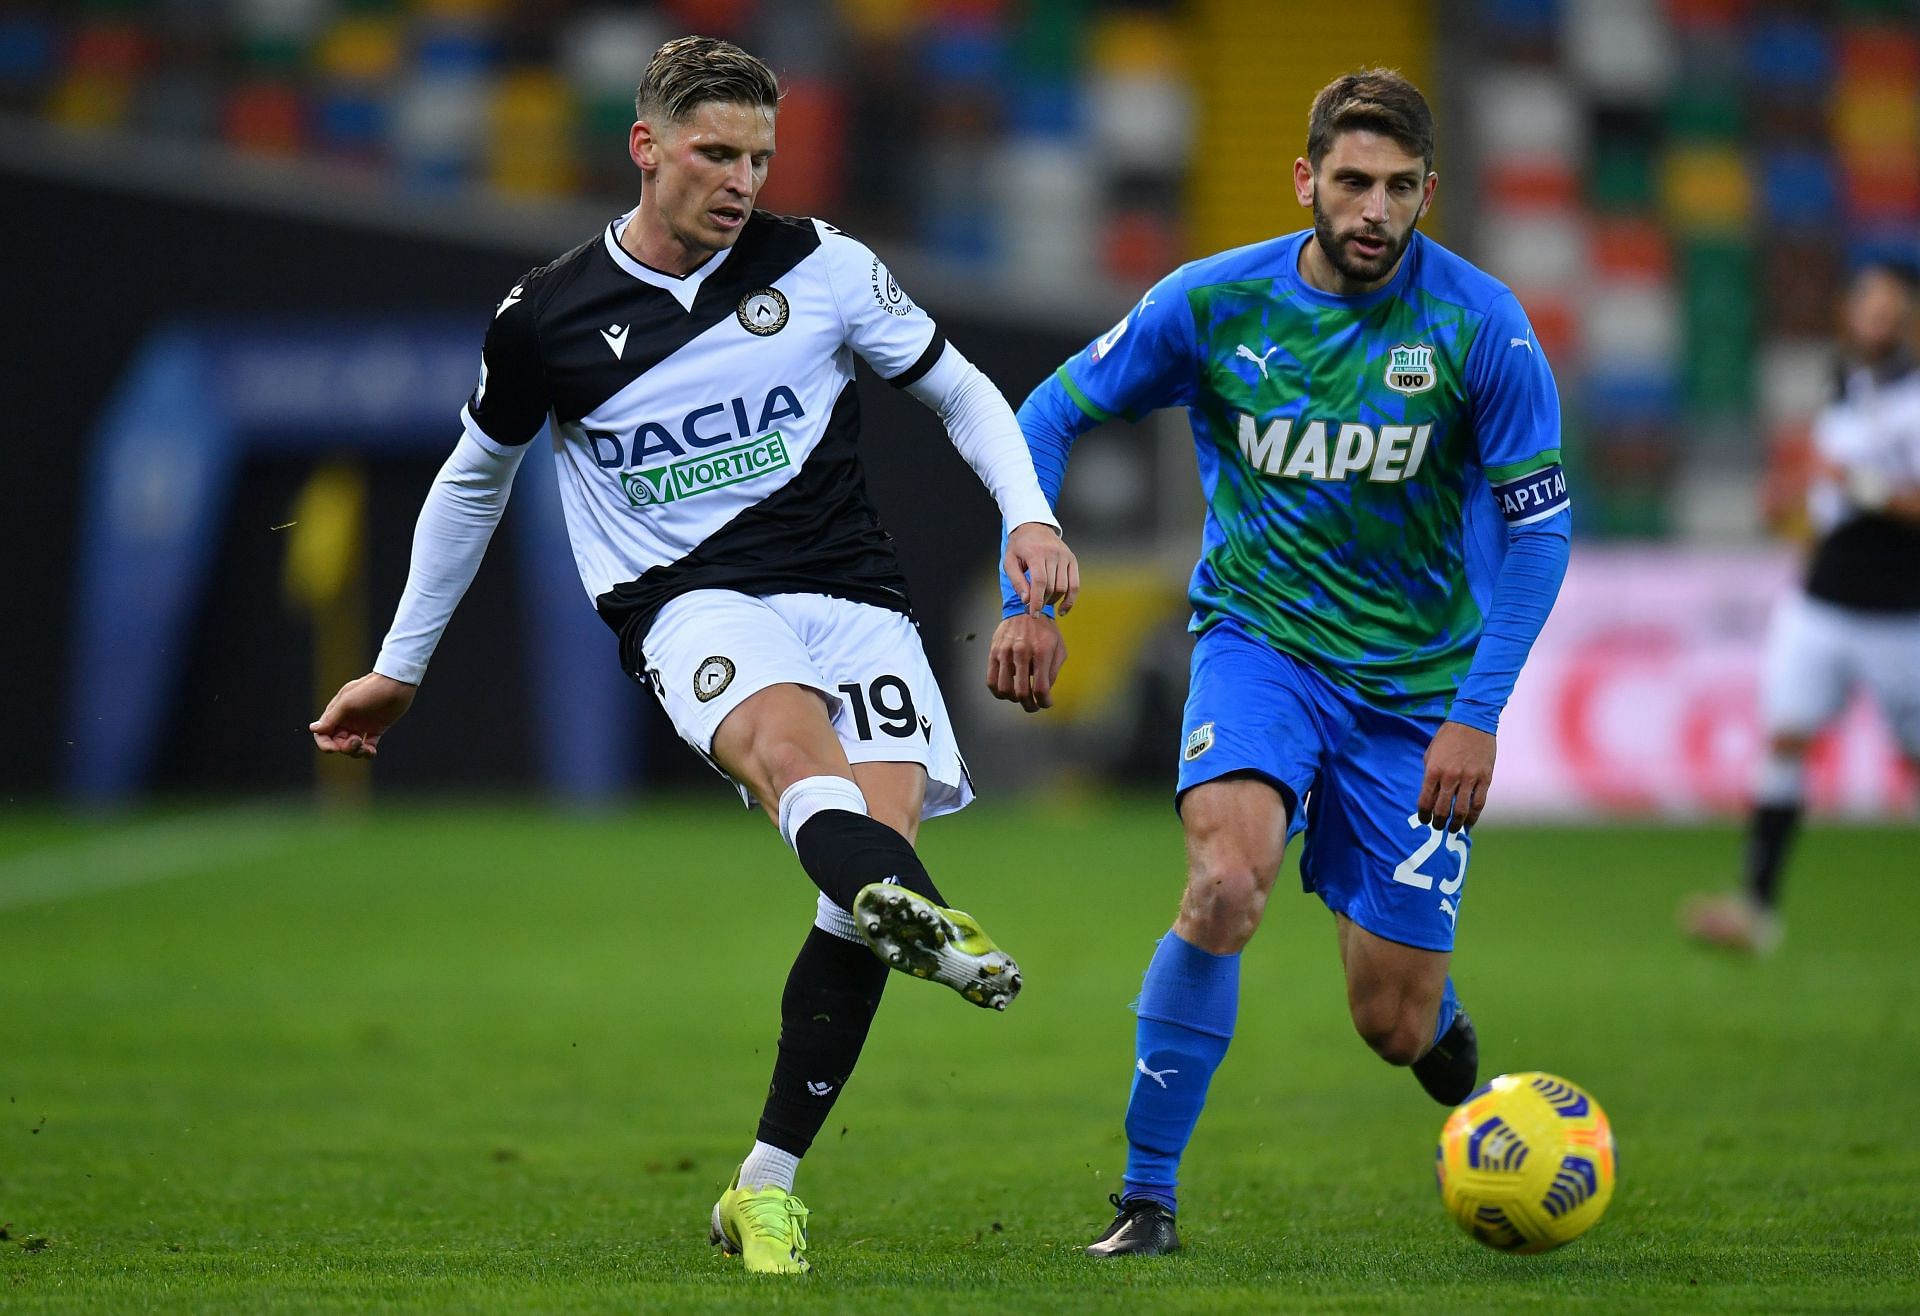 Udinese take on Sassuolo this weekend